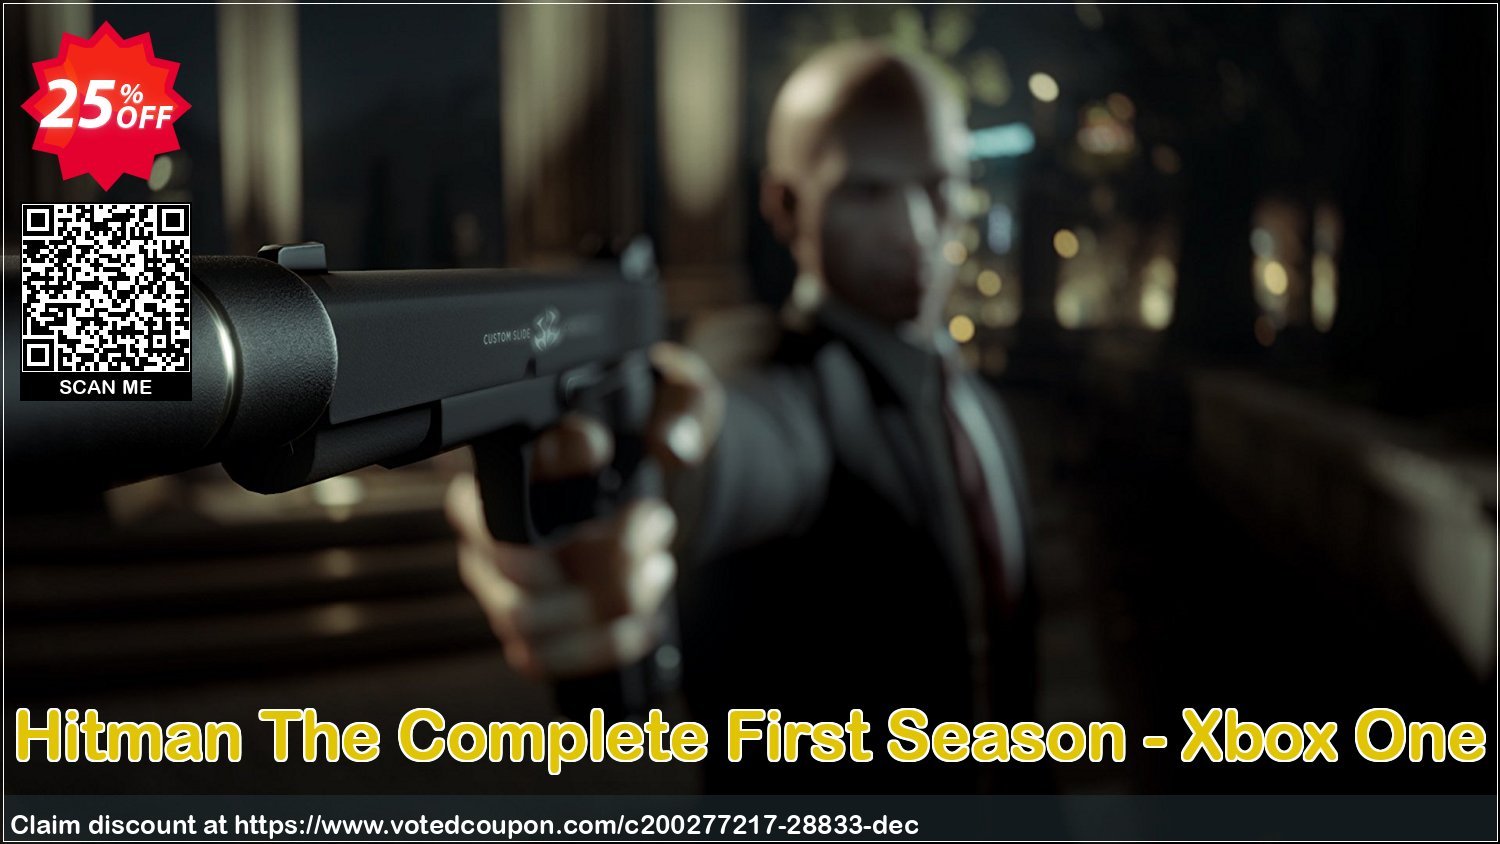 Hitman The Complete First Season - Xbox One Coupon Code Apr 2024, 25% OFF - VotedCoupon